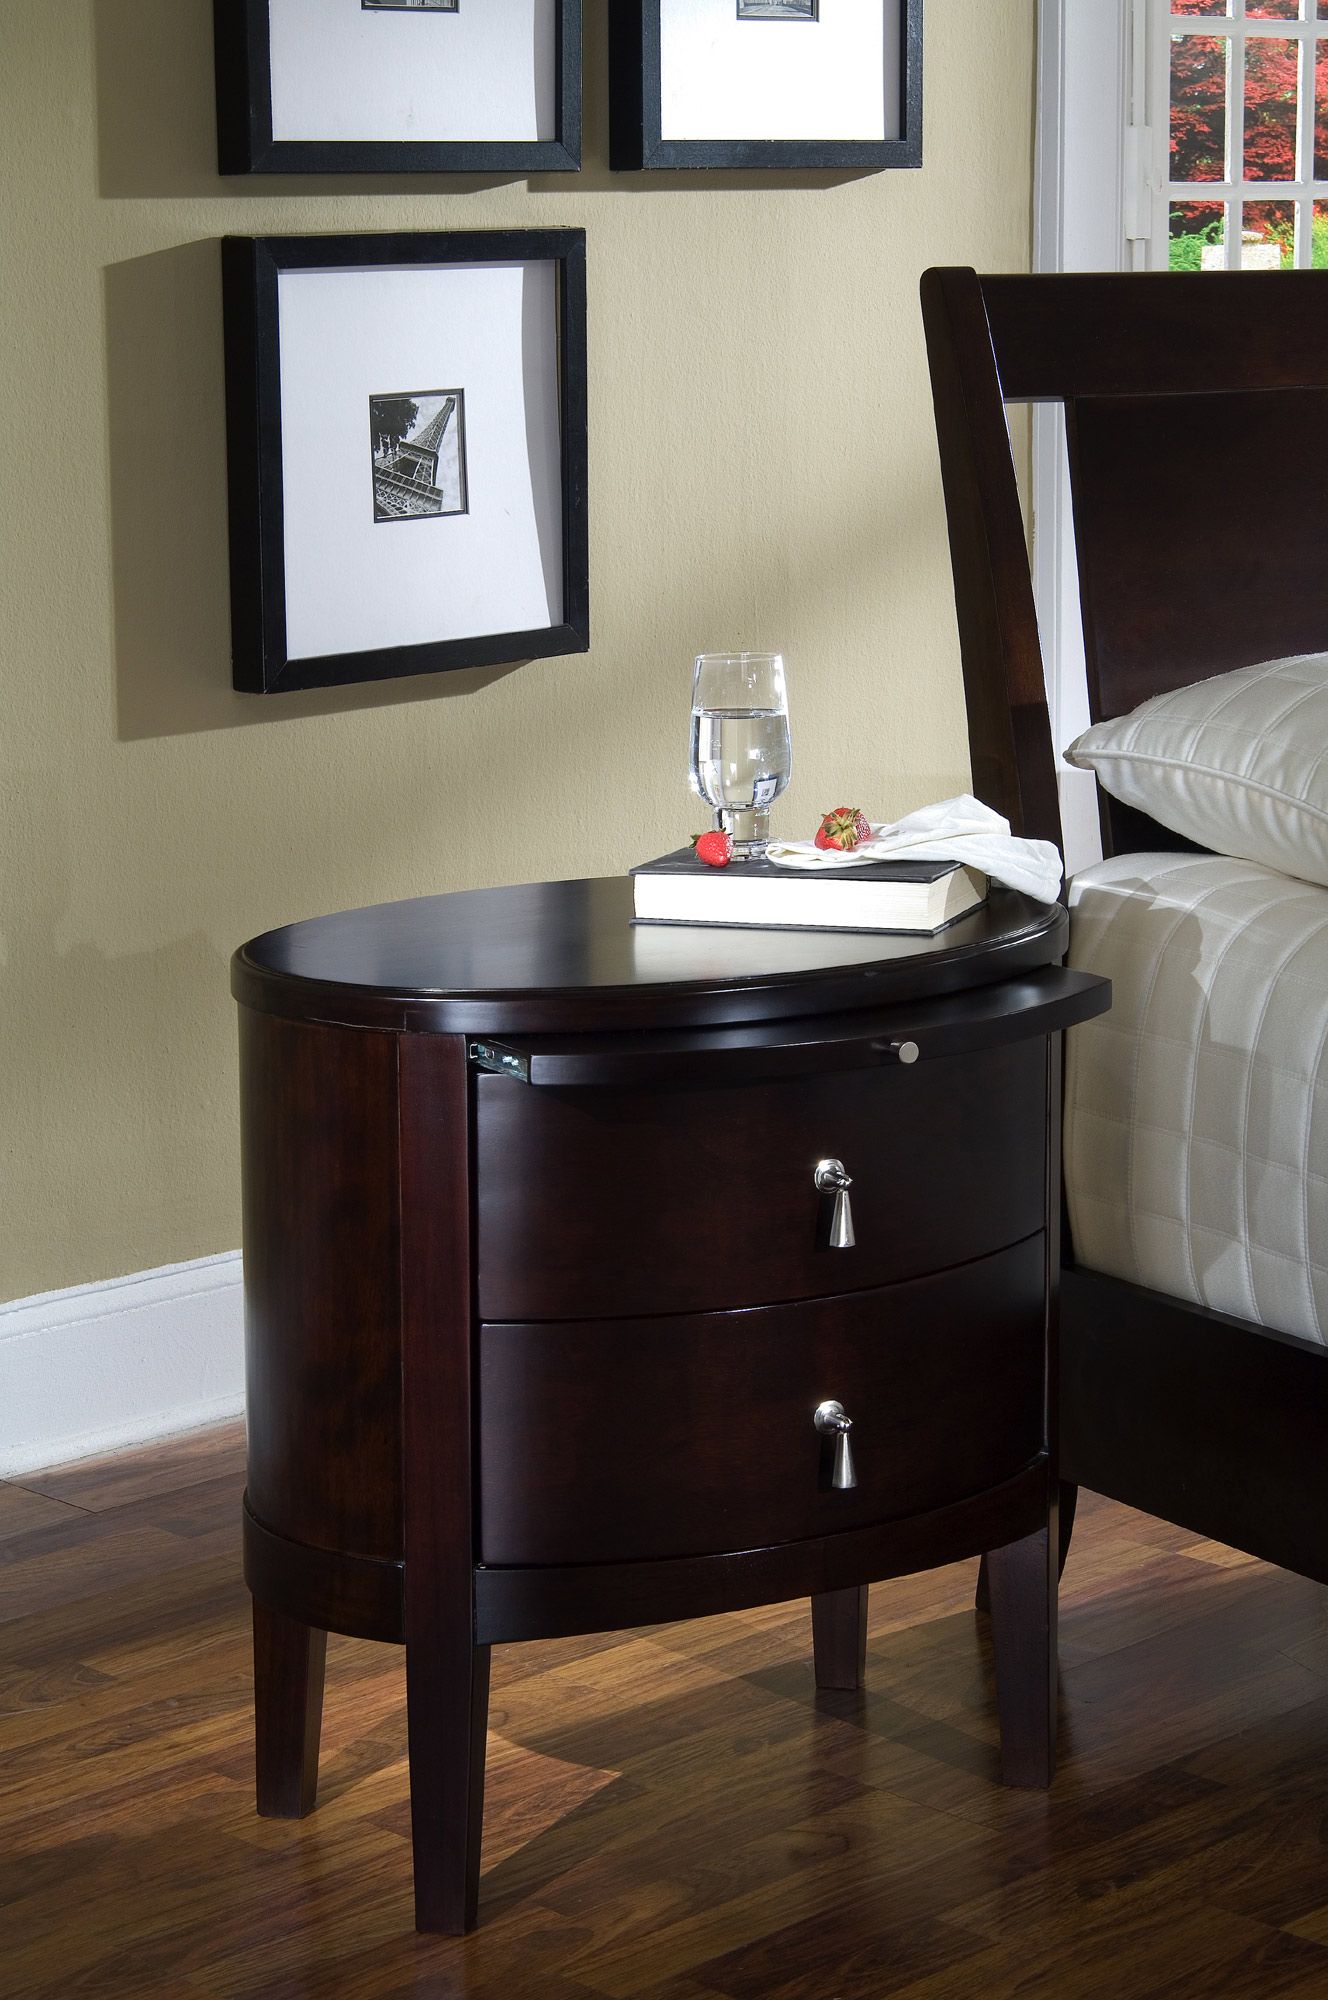 End Tables With Drawers For 2 Drawer Oval Coffee Tables (View 11 of 20)